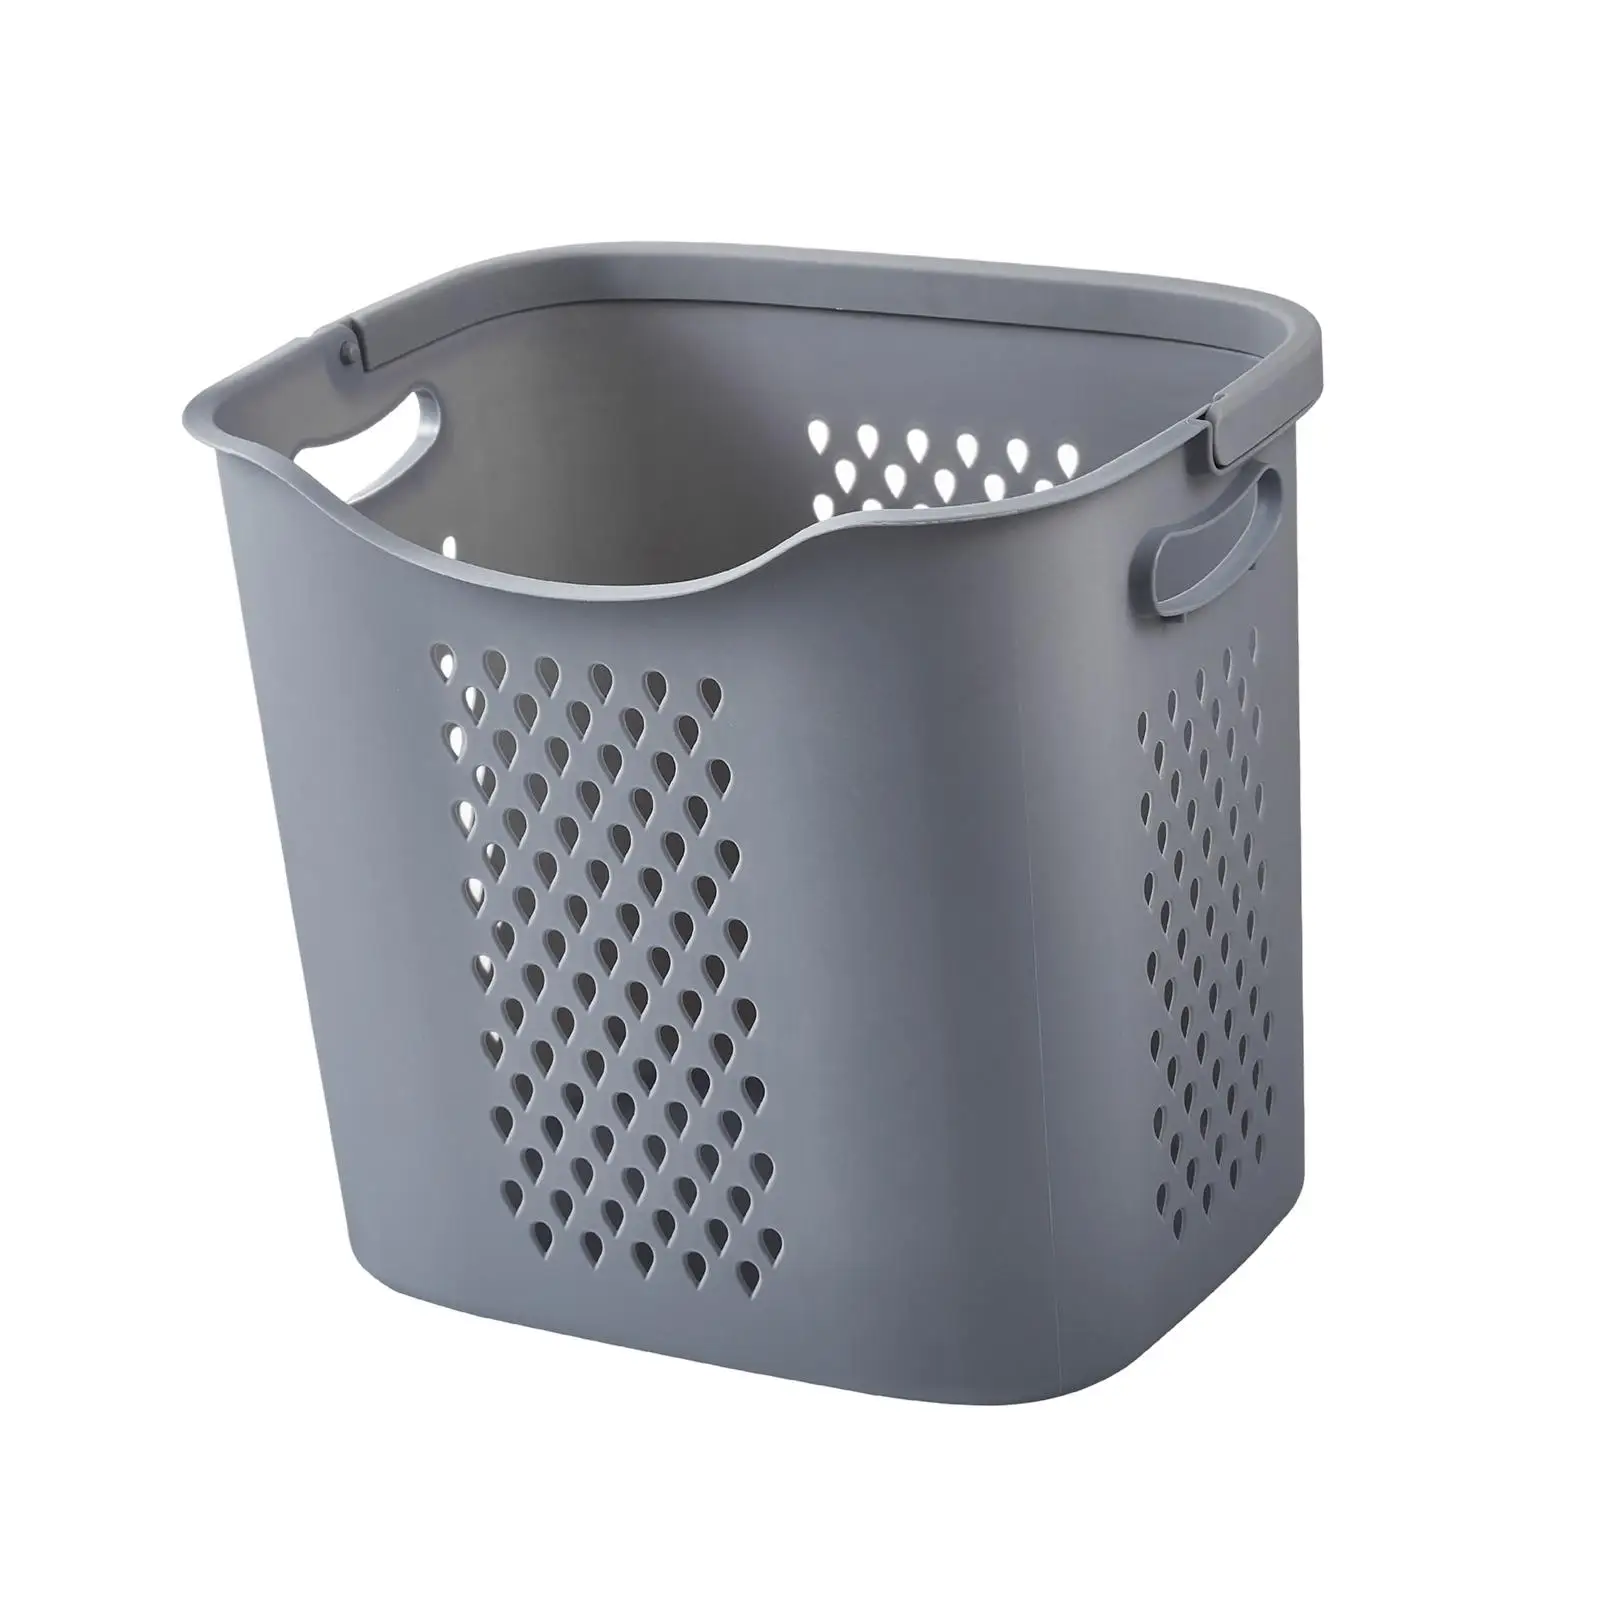 Laundry Basket Clothes Bag Bucket Organizer Storage Bucket for Dirty Clothes